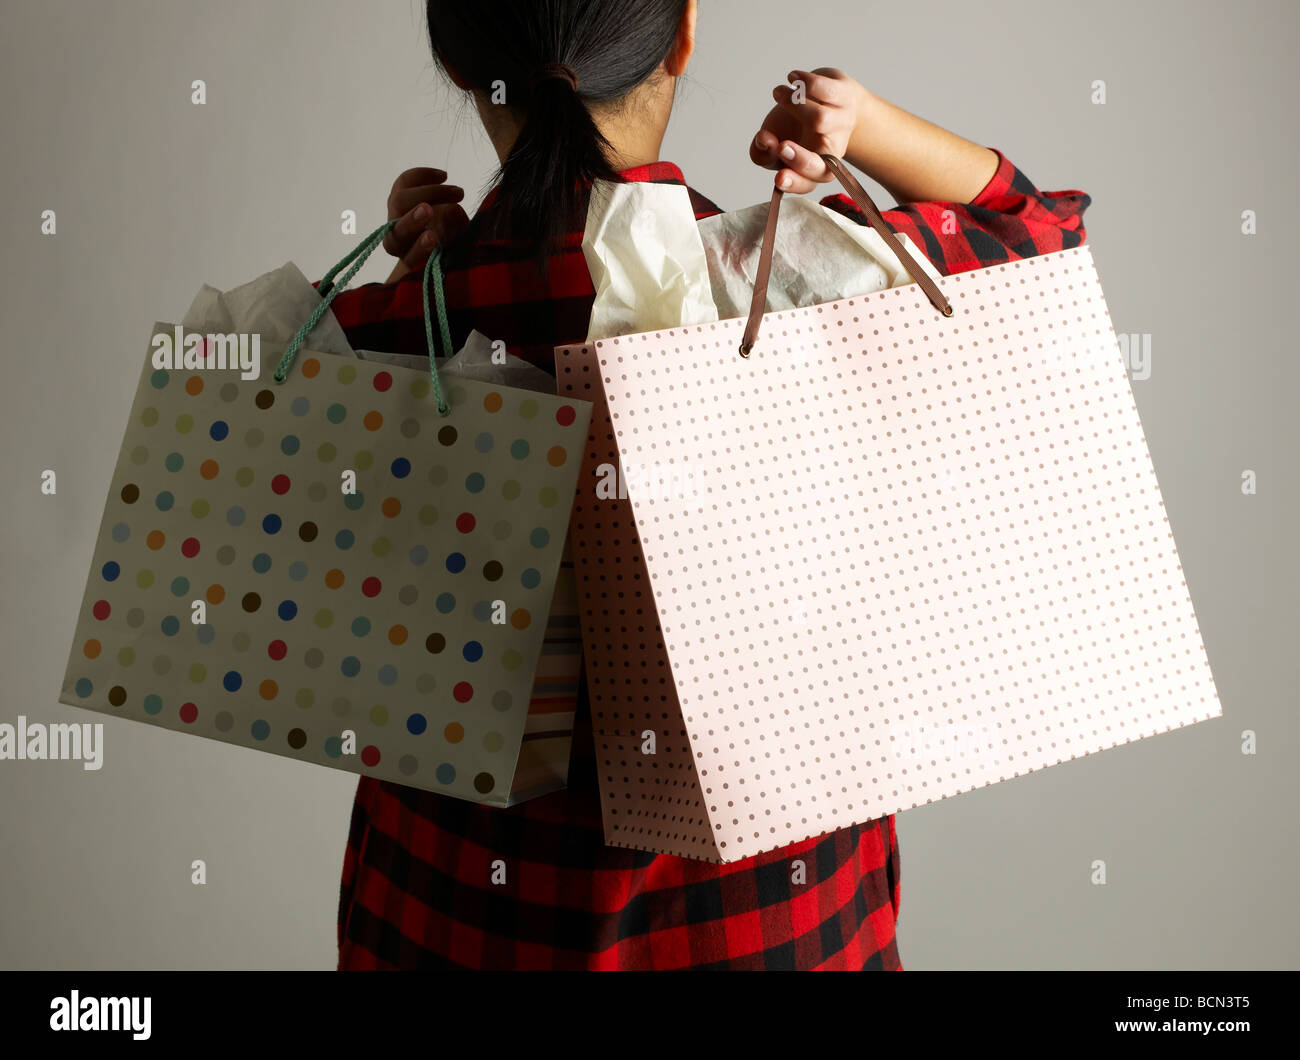 Rear View of Woman with Shopping Bags Stock Photo